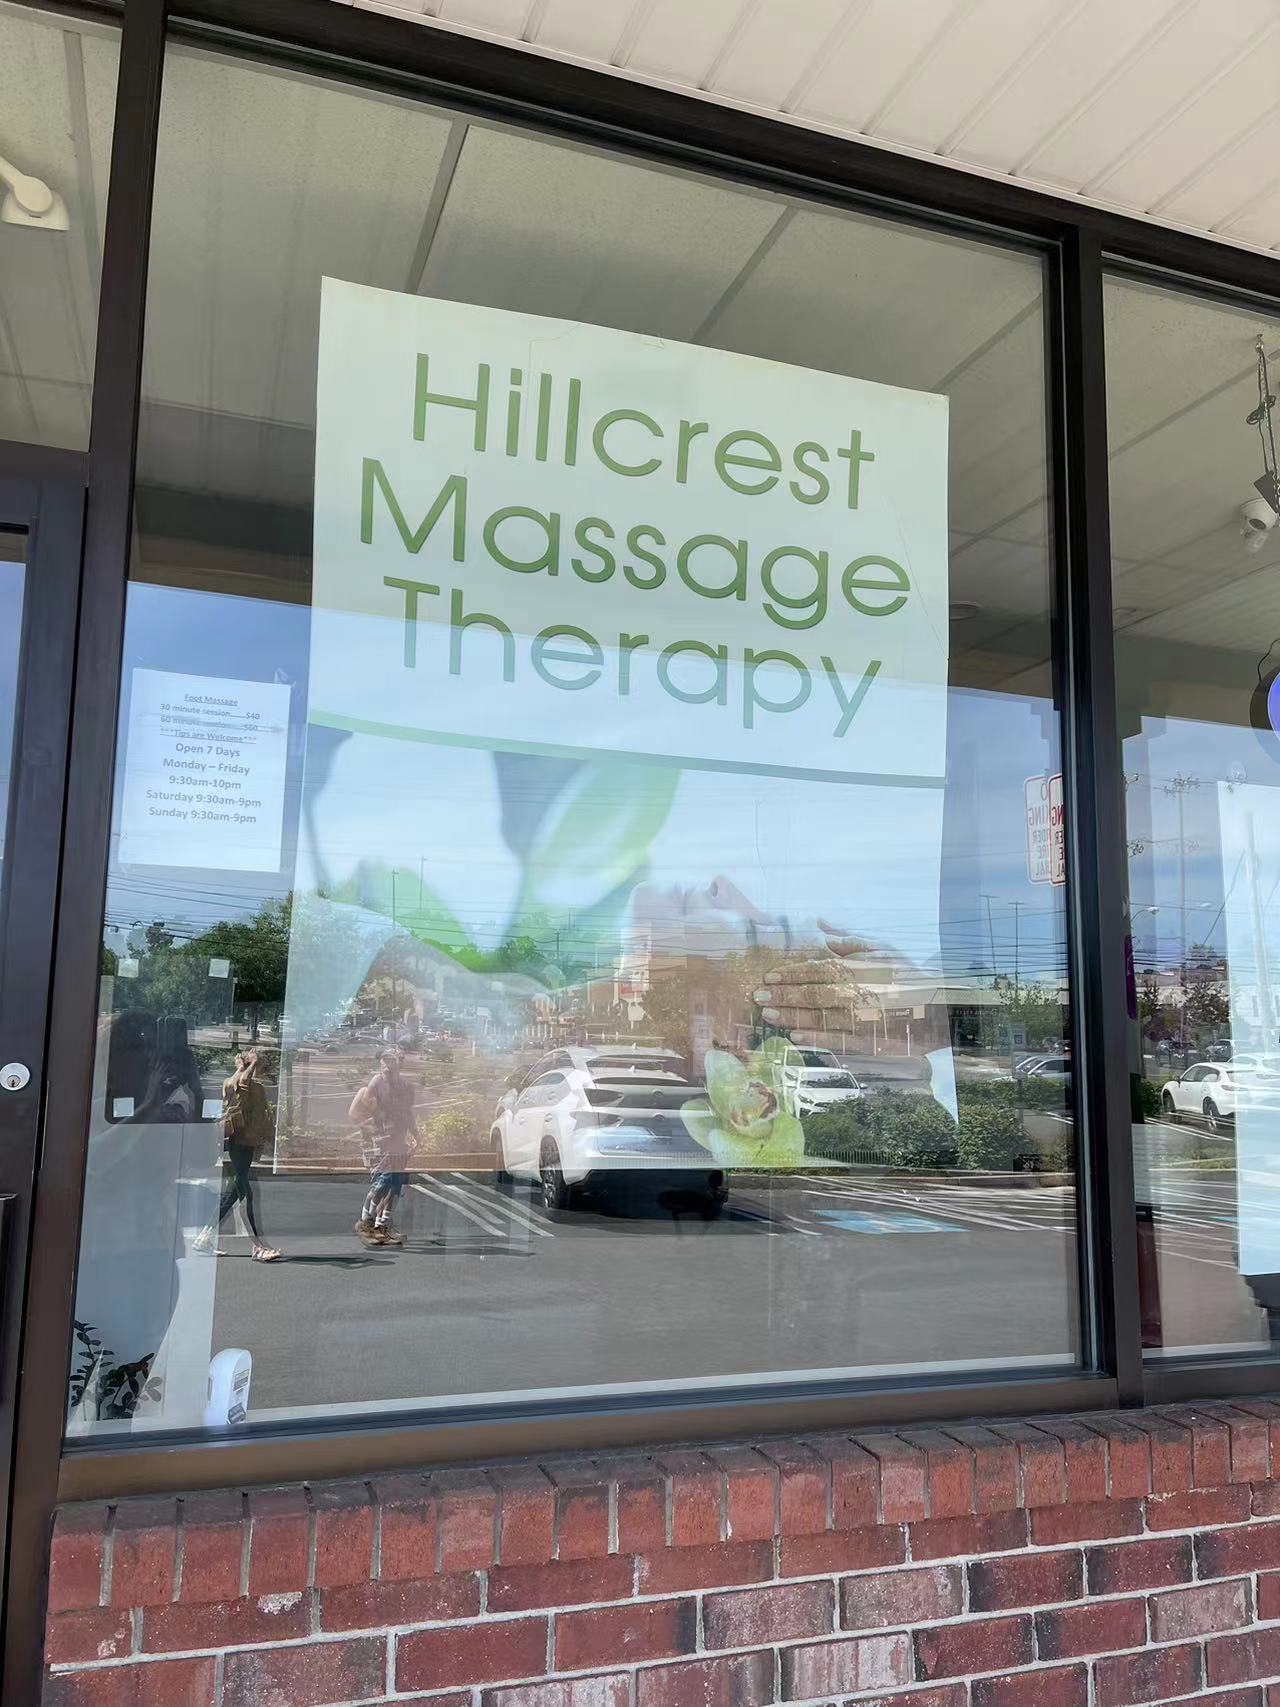 Hillcrest Massage Therapy 102-C W Germantown Pike, East Norriton Pennsylvania 19401